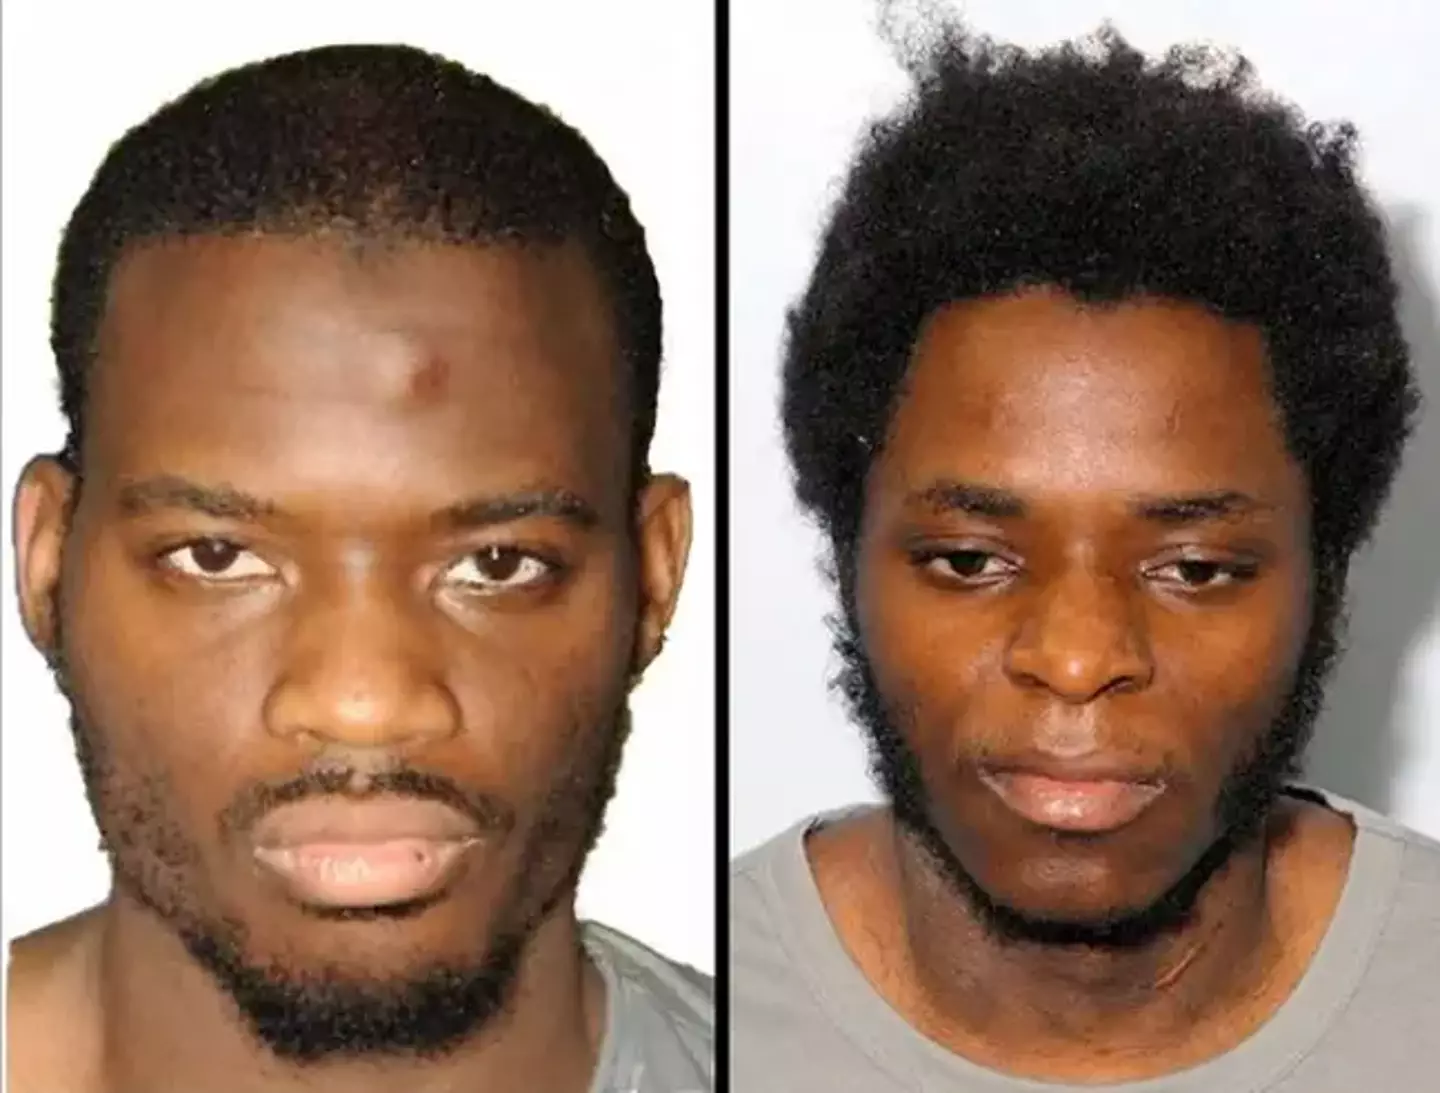 Michael Adebolajo (left) and Michael Adebowale (right).